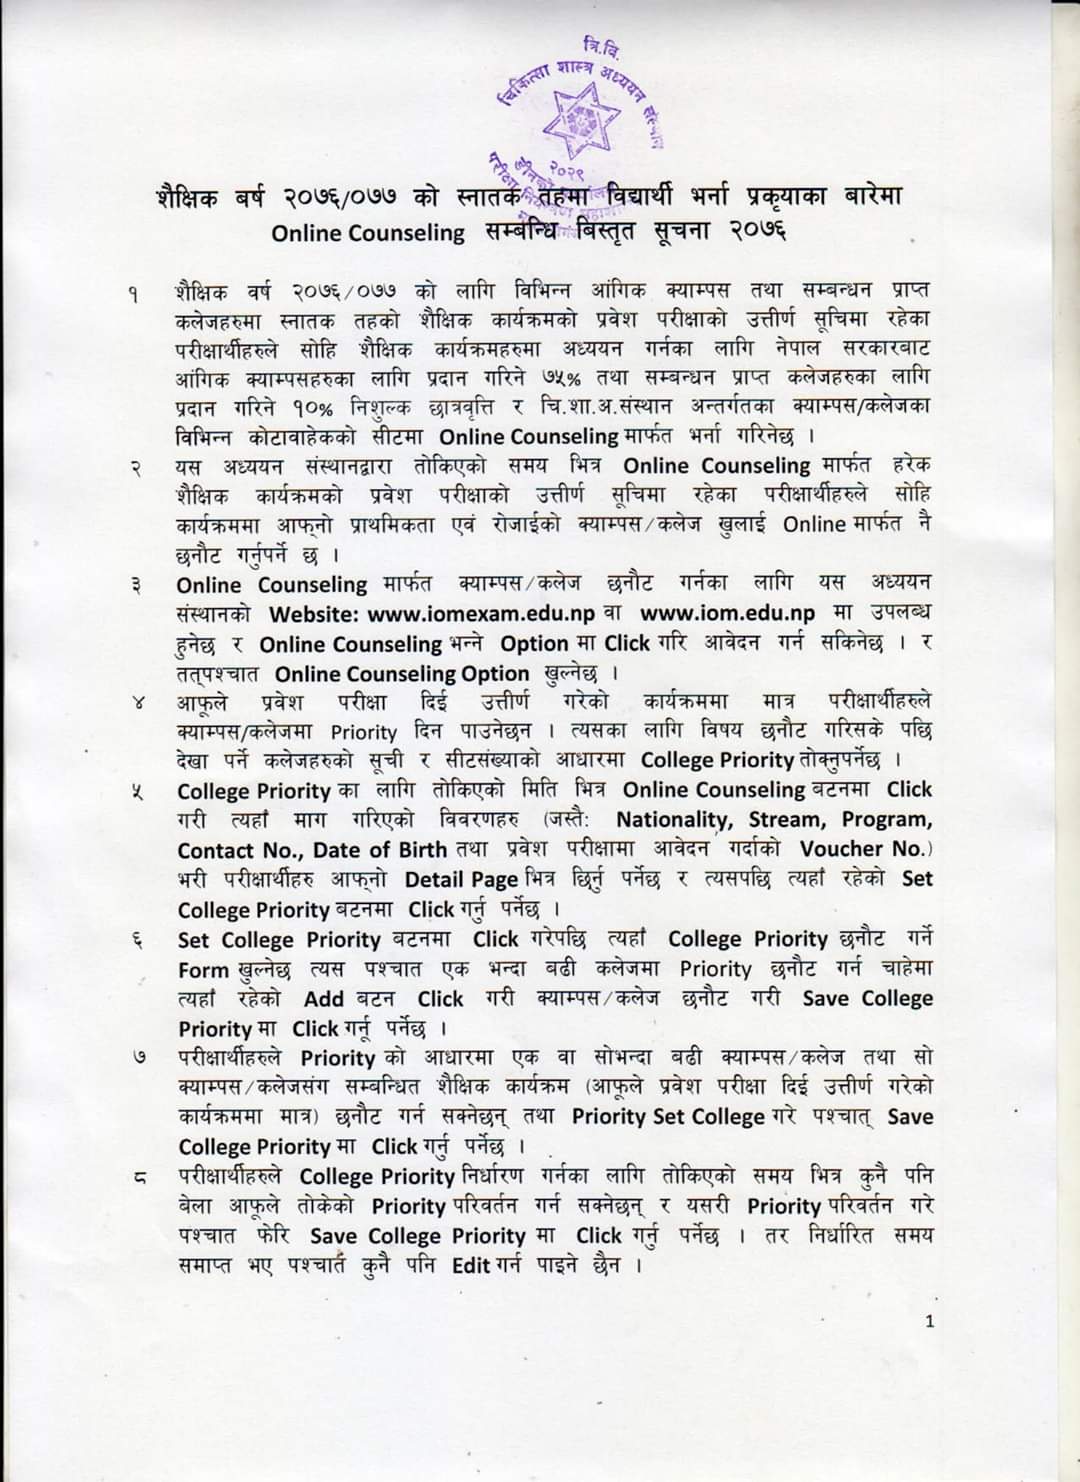 Notice Regarding Online Counseling of Bachelor Entrance Examination 2076/077 (2019) for Nepalese Candidates